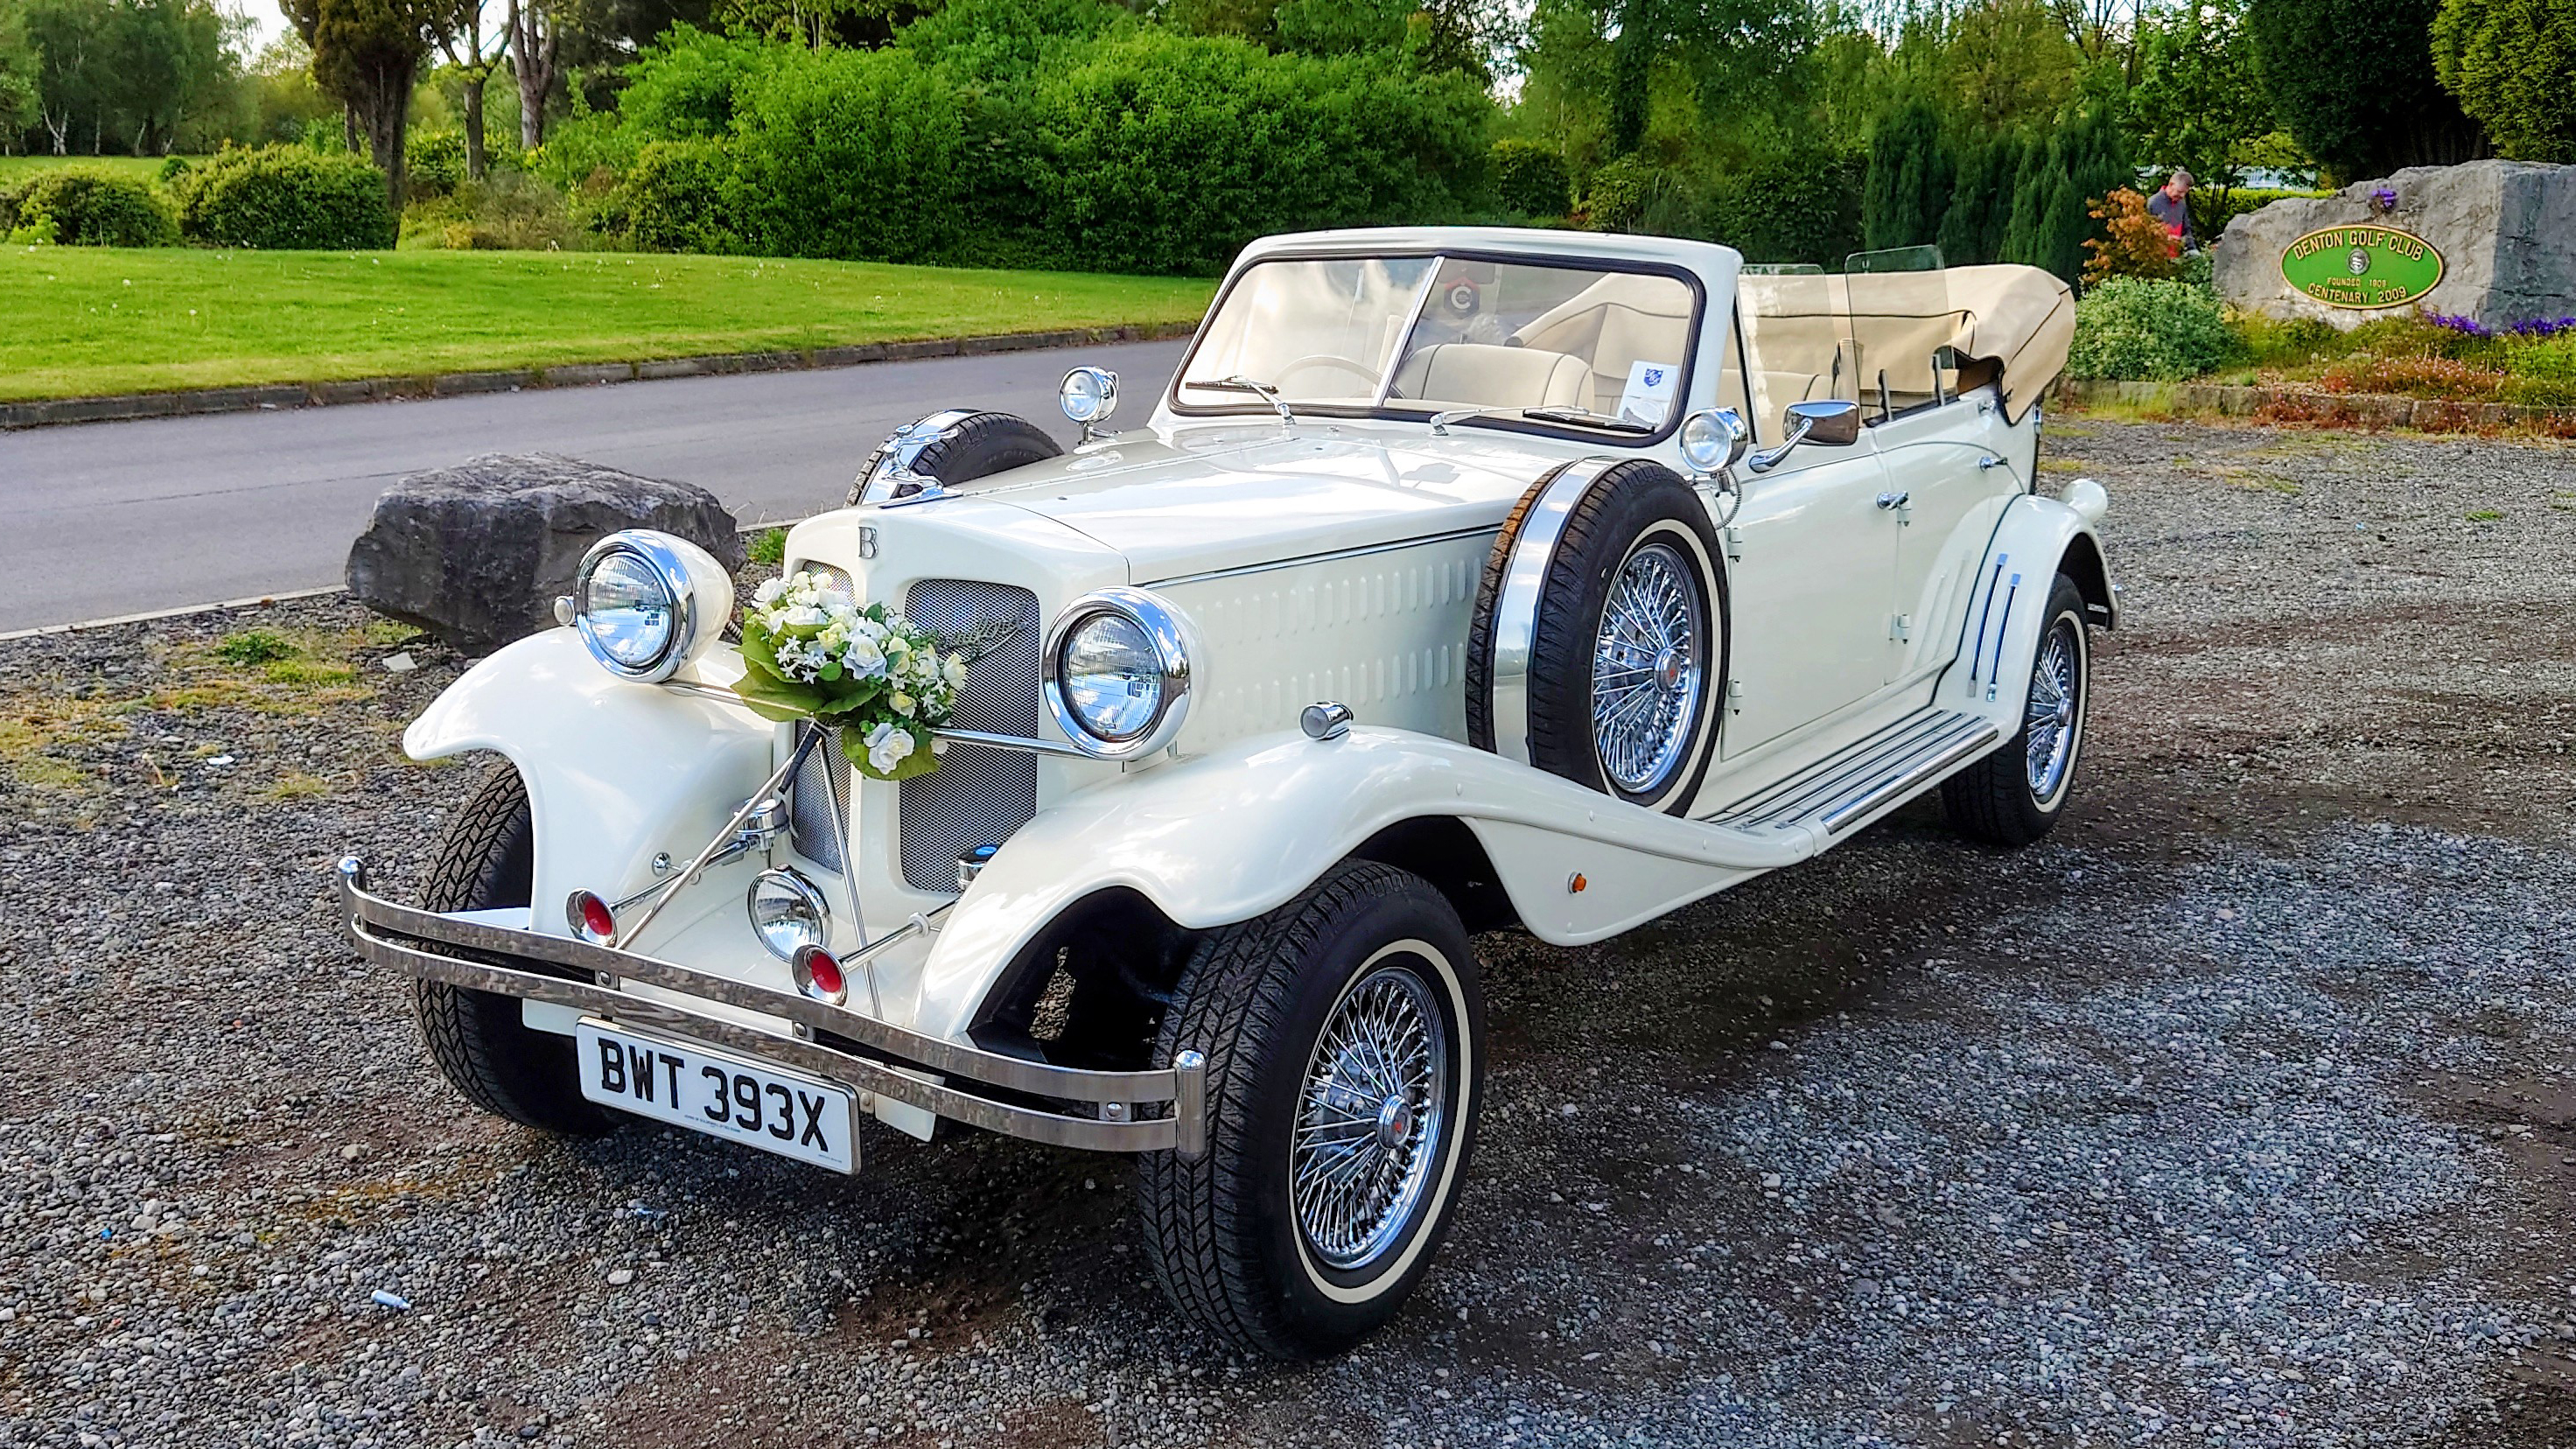 Ivory classic convertible Beauford with roof down dressed with wedding flower arrangment on its front grill. Vehicle is parked in the middle of a path in a Wigan Park.